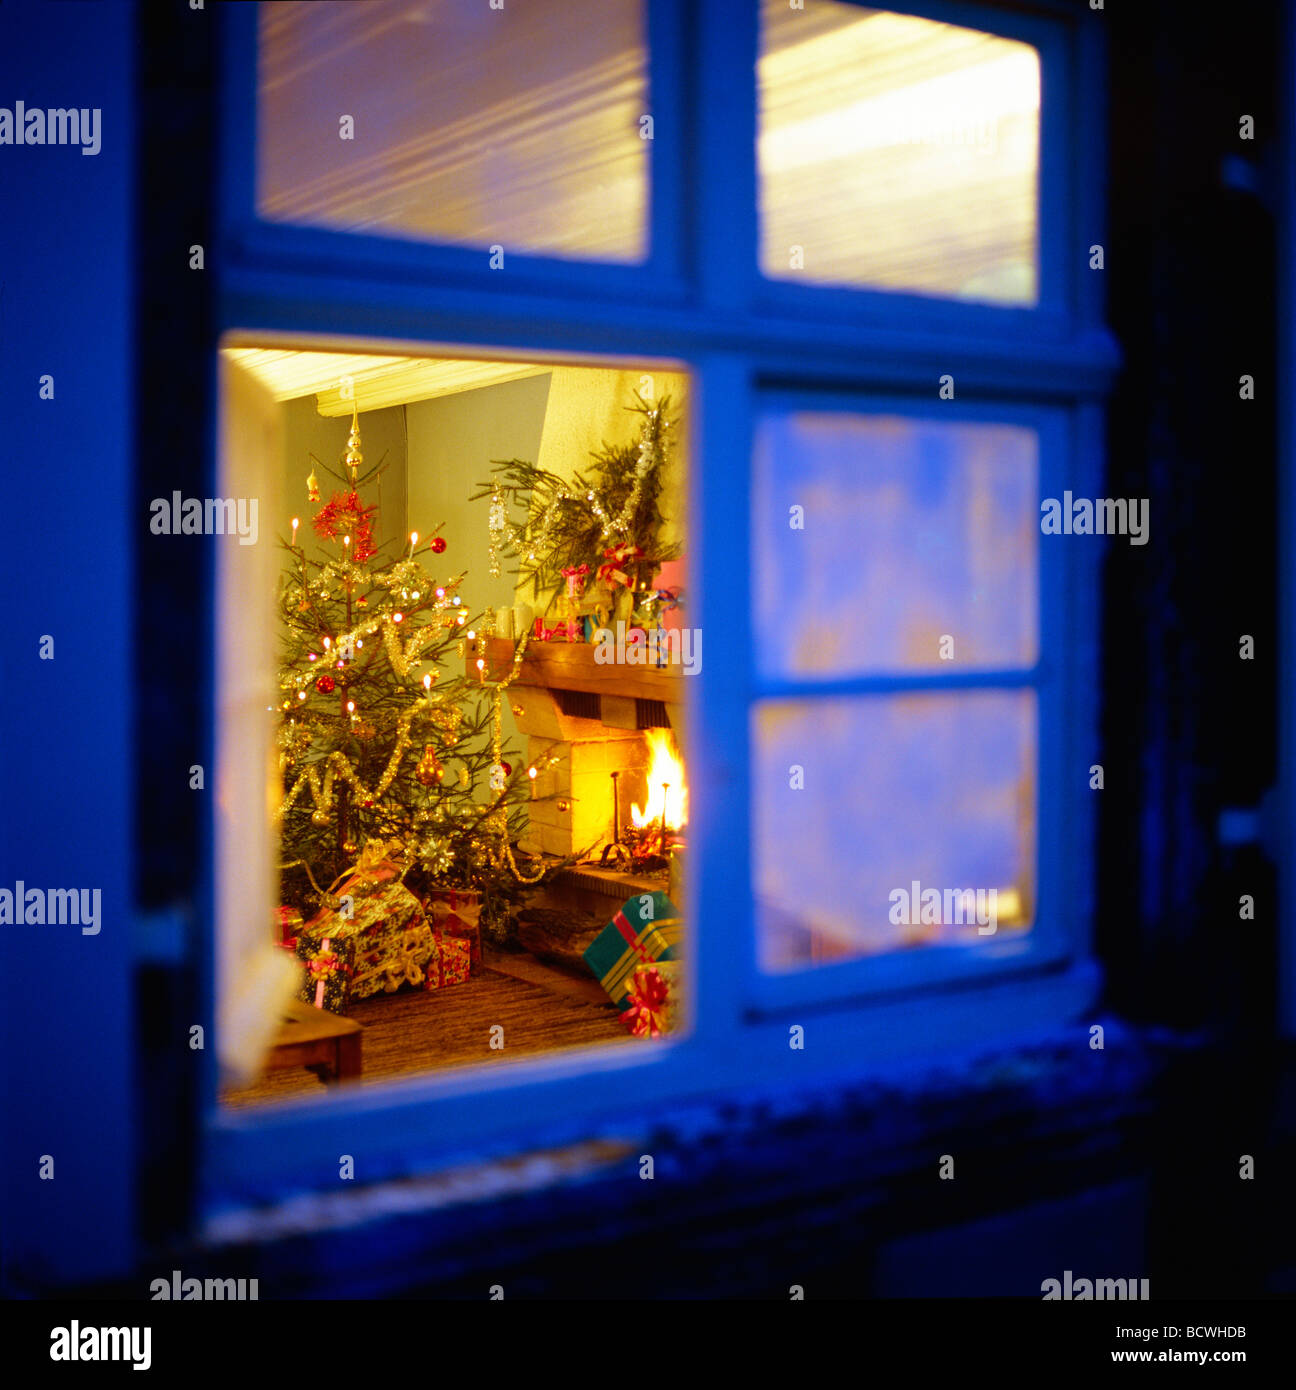 CHRISTMAS PRESENTS UNDER THE TREE AND FIREPLACE SEEN THROUGH WINDOW AT NIGHT Stock Photo